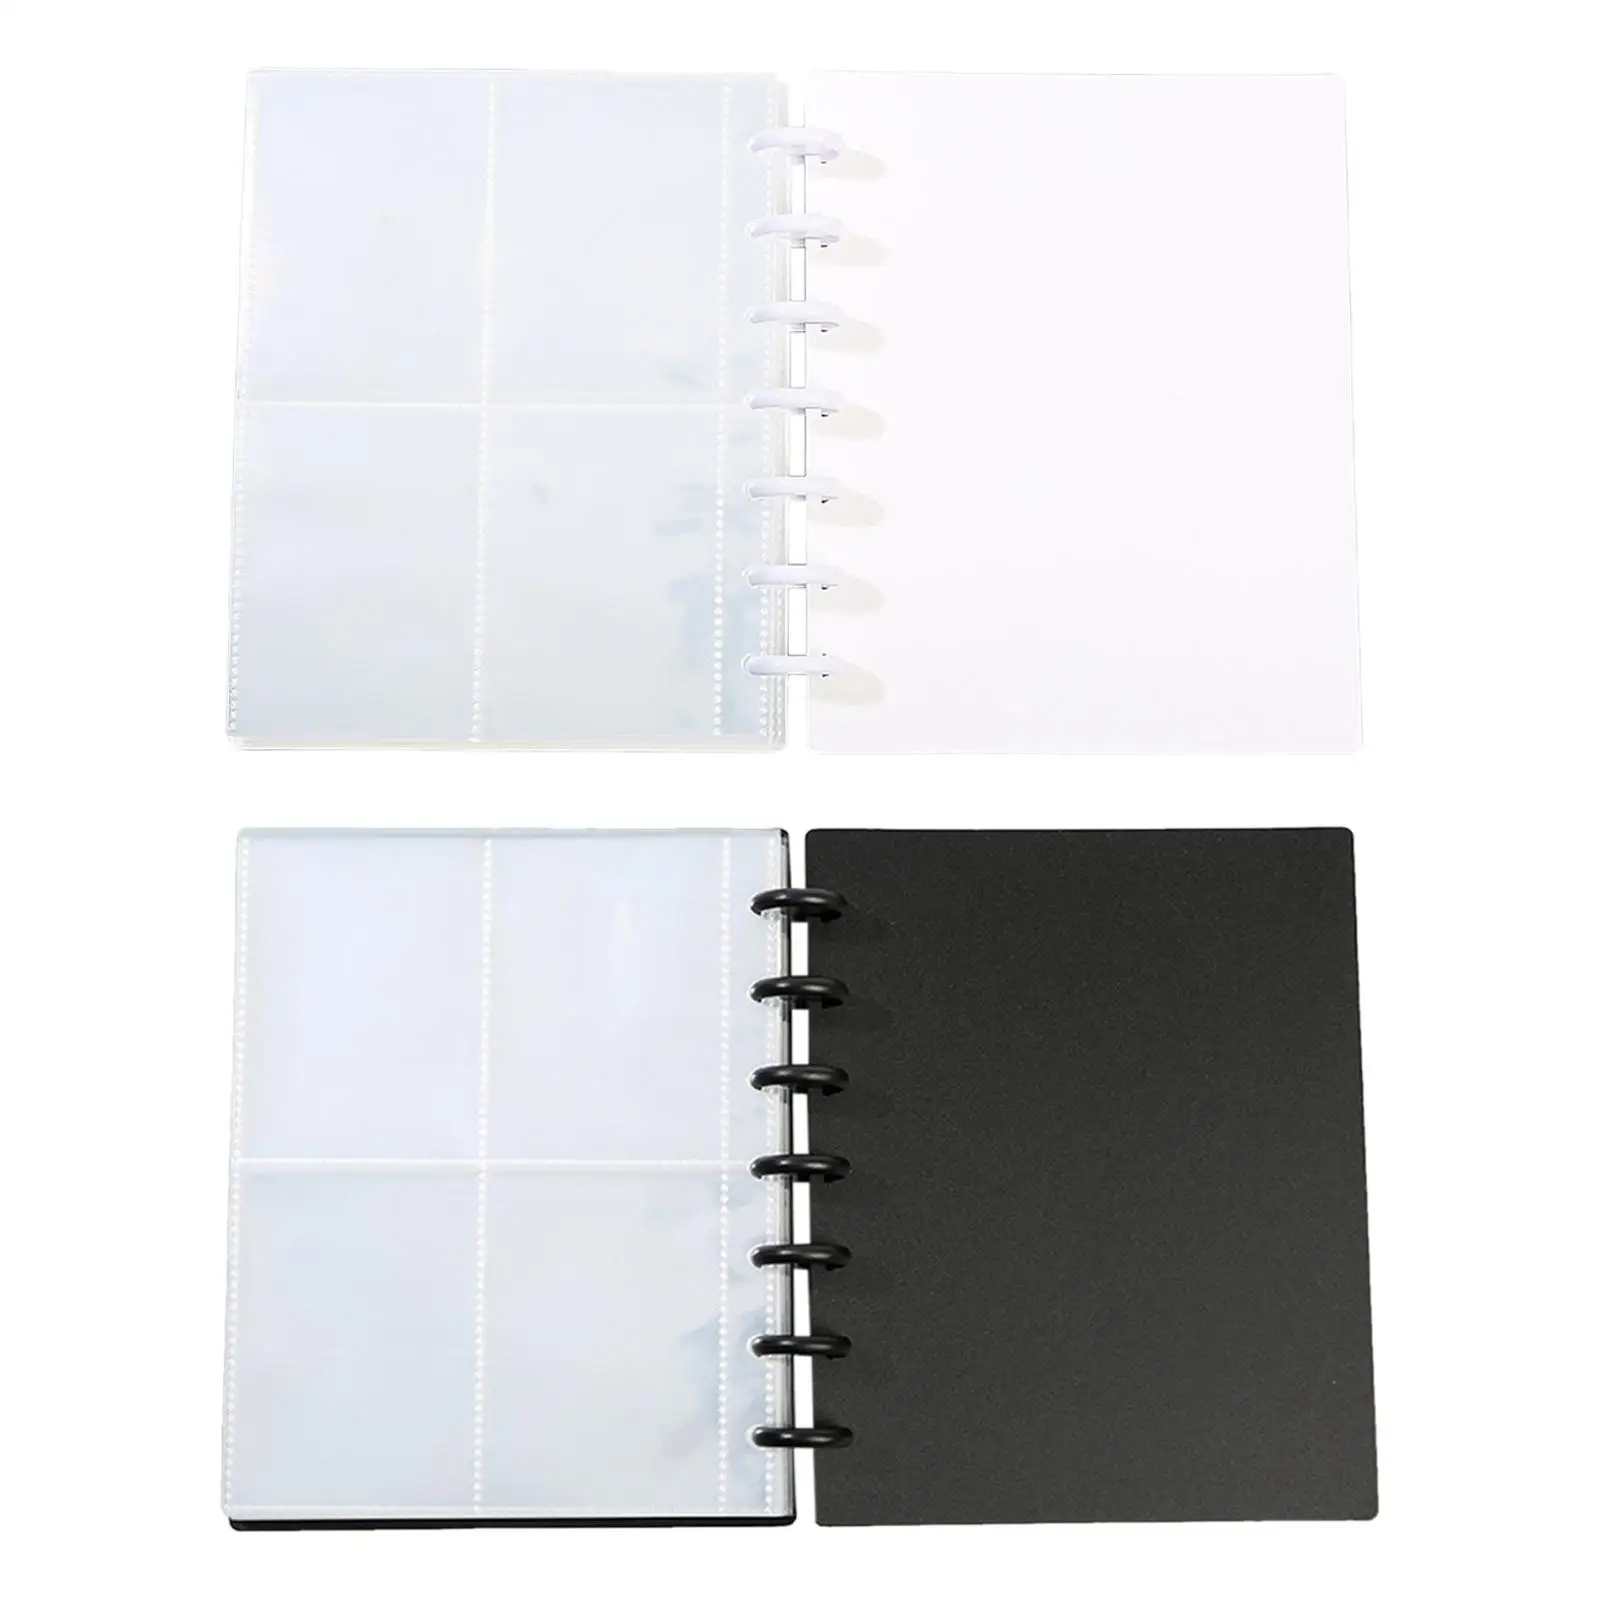 3 inch Mini Photo Album Card Protectors Sleeve Pages for Holder Storage